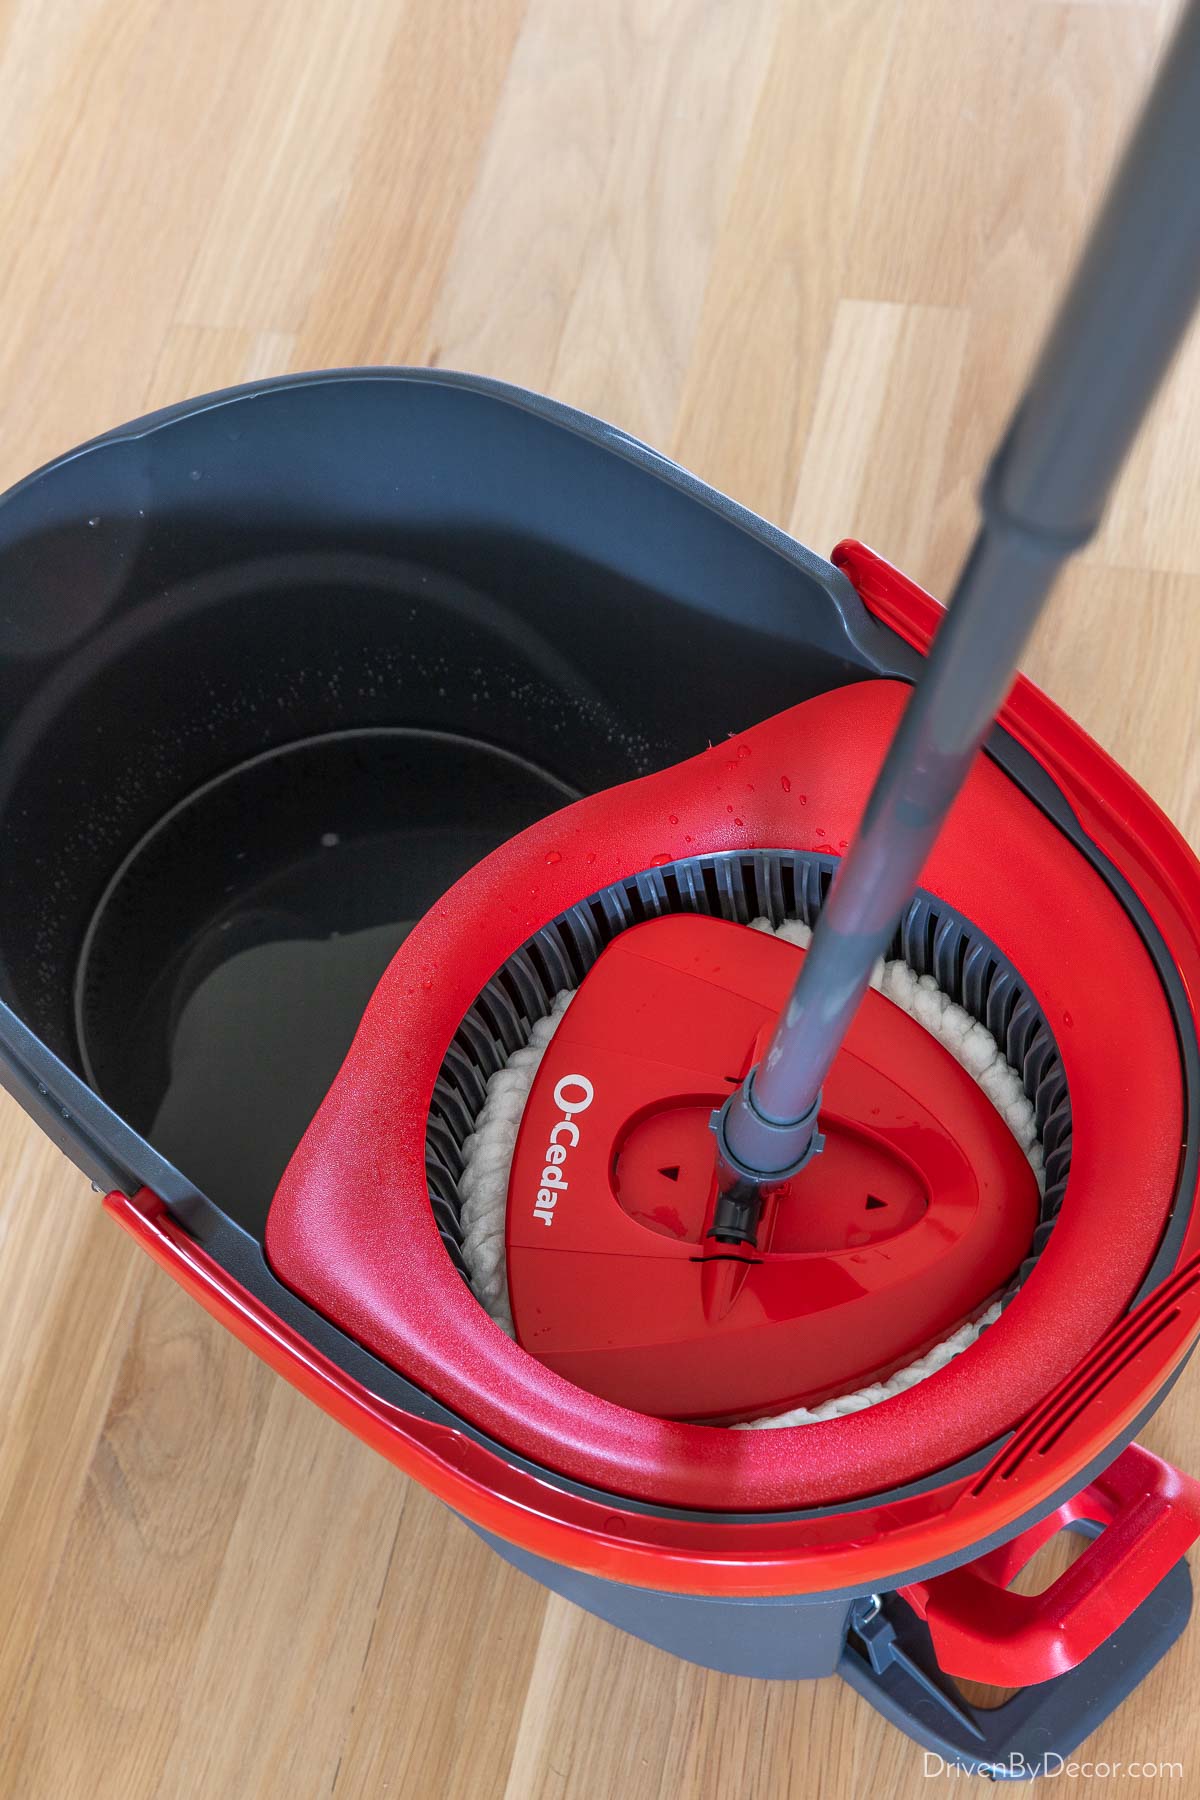 The spin mop system for cleaning hardwood floors